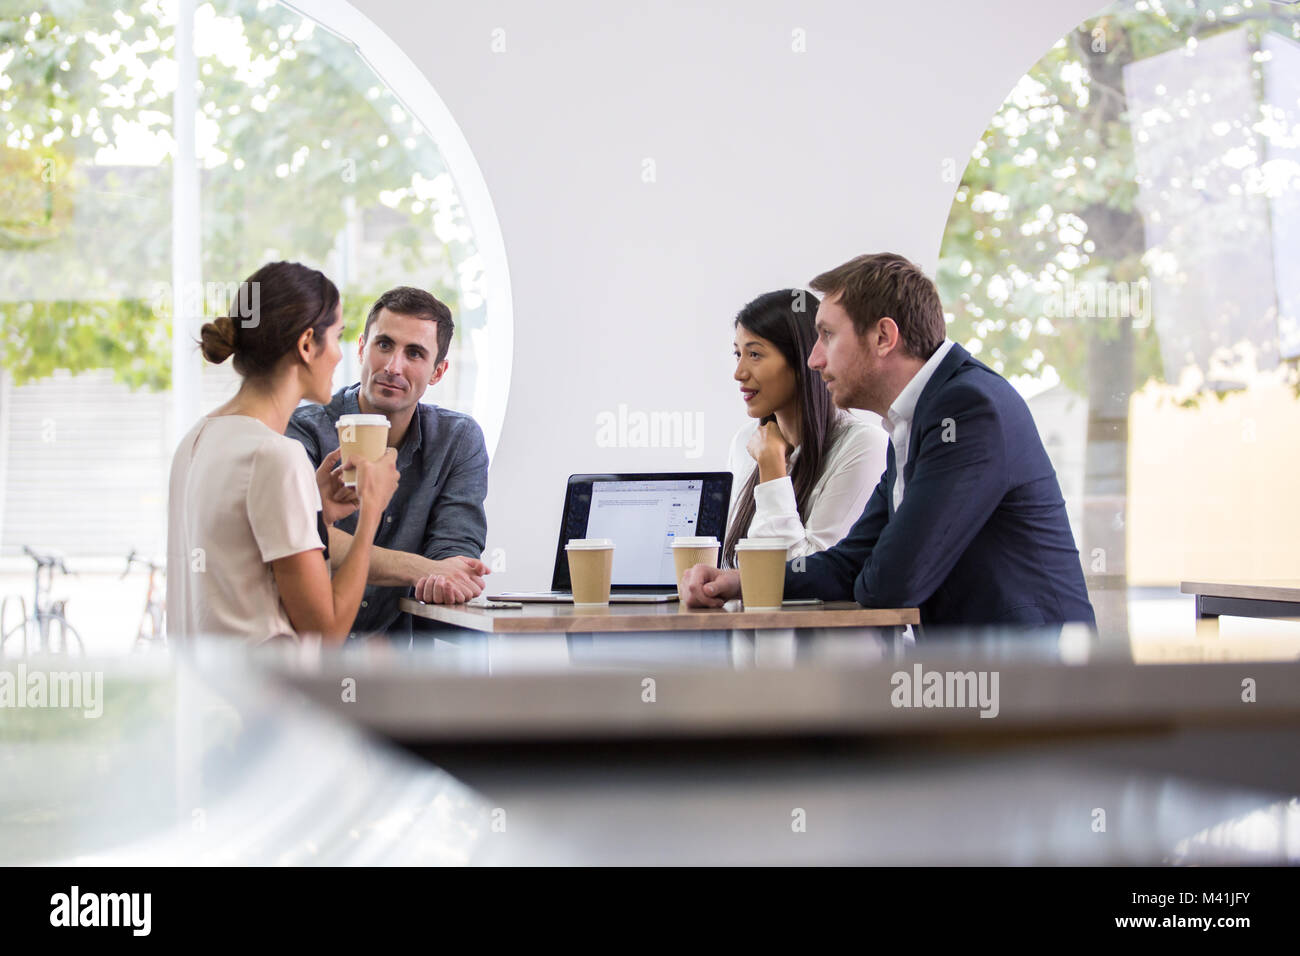 Colleagues having a  business meeting Stock Photo